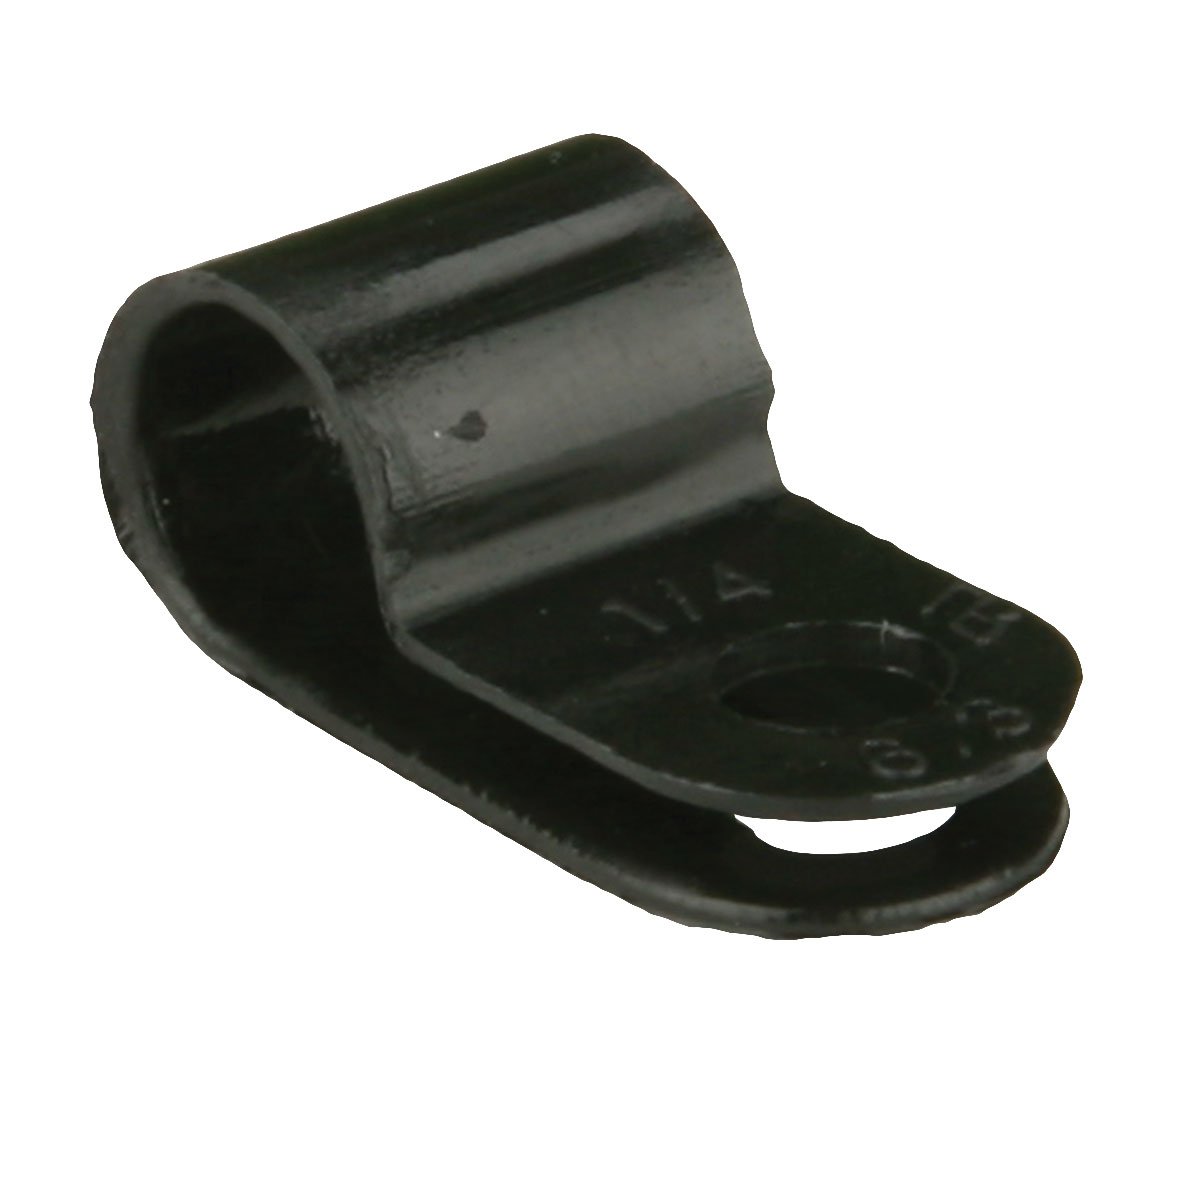 CABLE CLAMPS BLACK 1 INCH PACKAGE OF 100